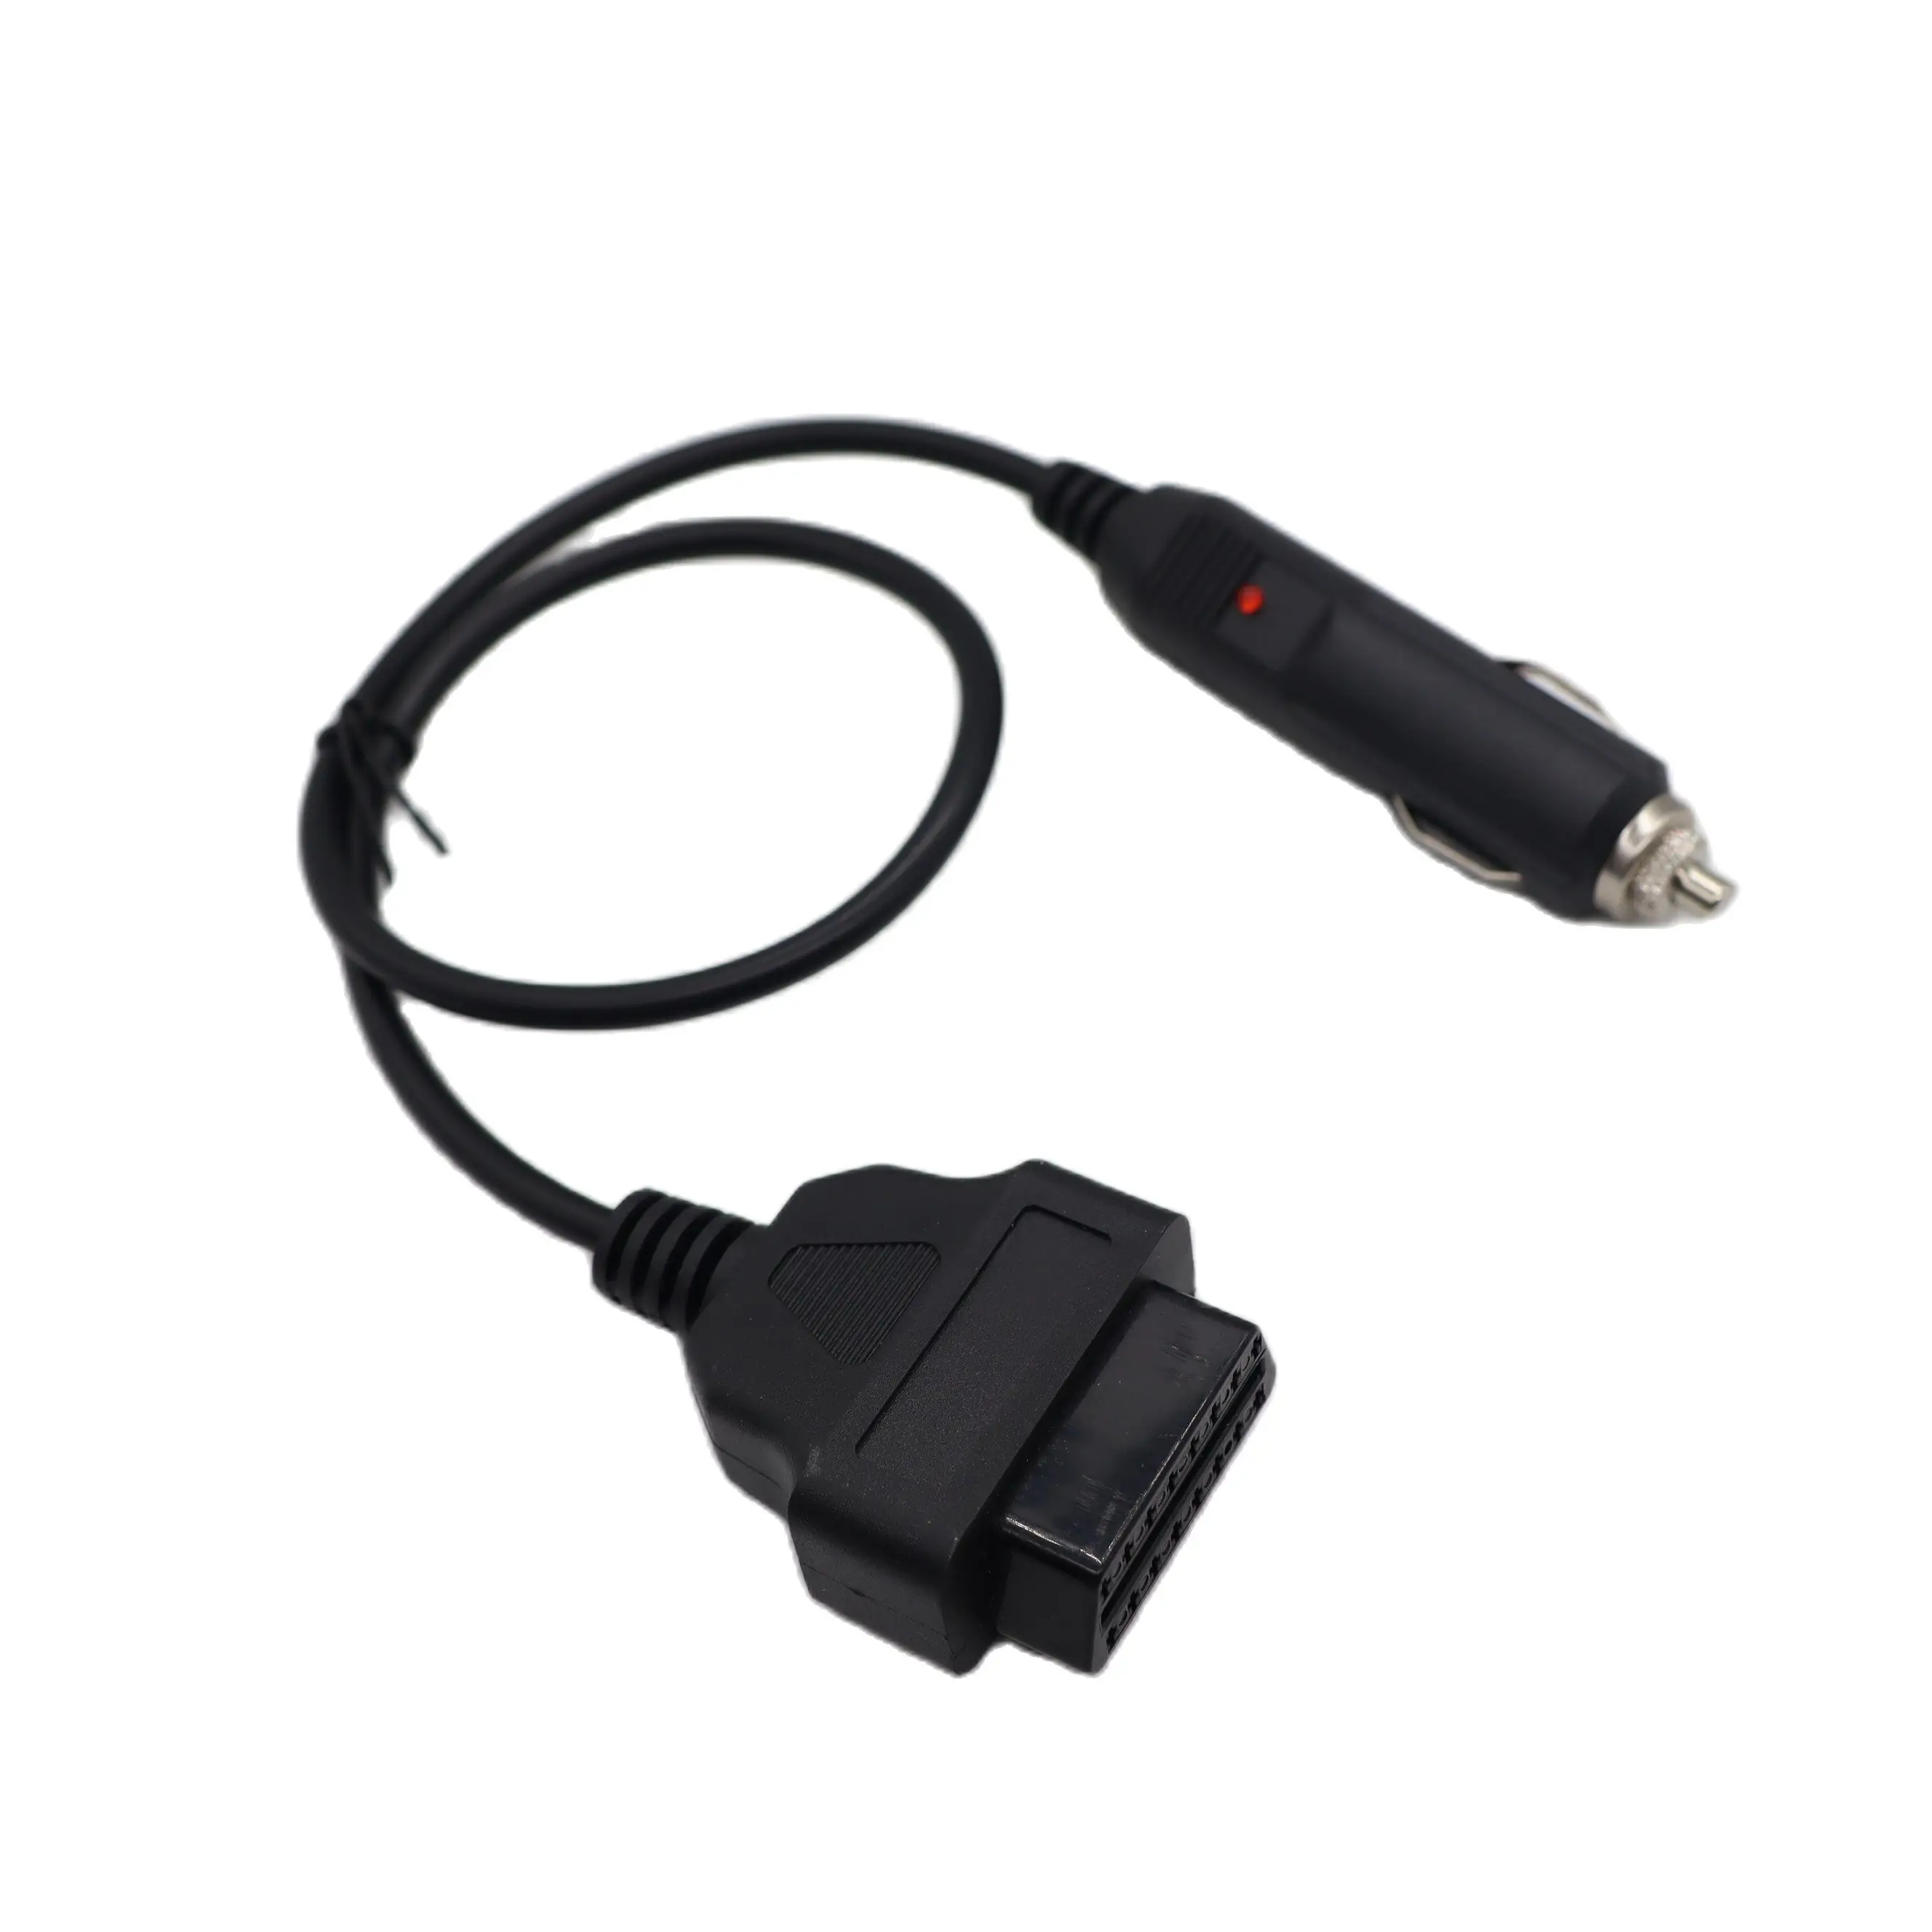 OBDII OBD2 Power Supply Cable 16Pin Female to Car Cigarette Lighter 12V DC Power Source OBD 2 Female Connector Cable Adapter images - 6